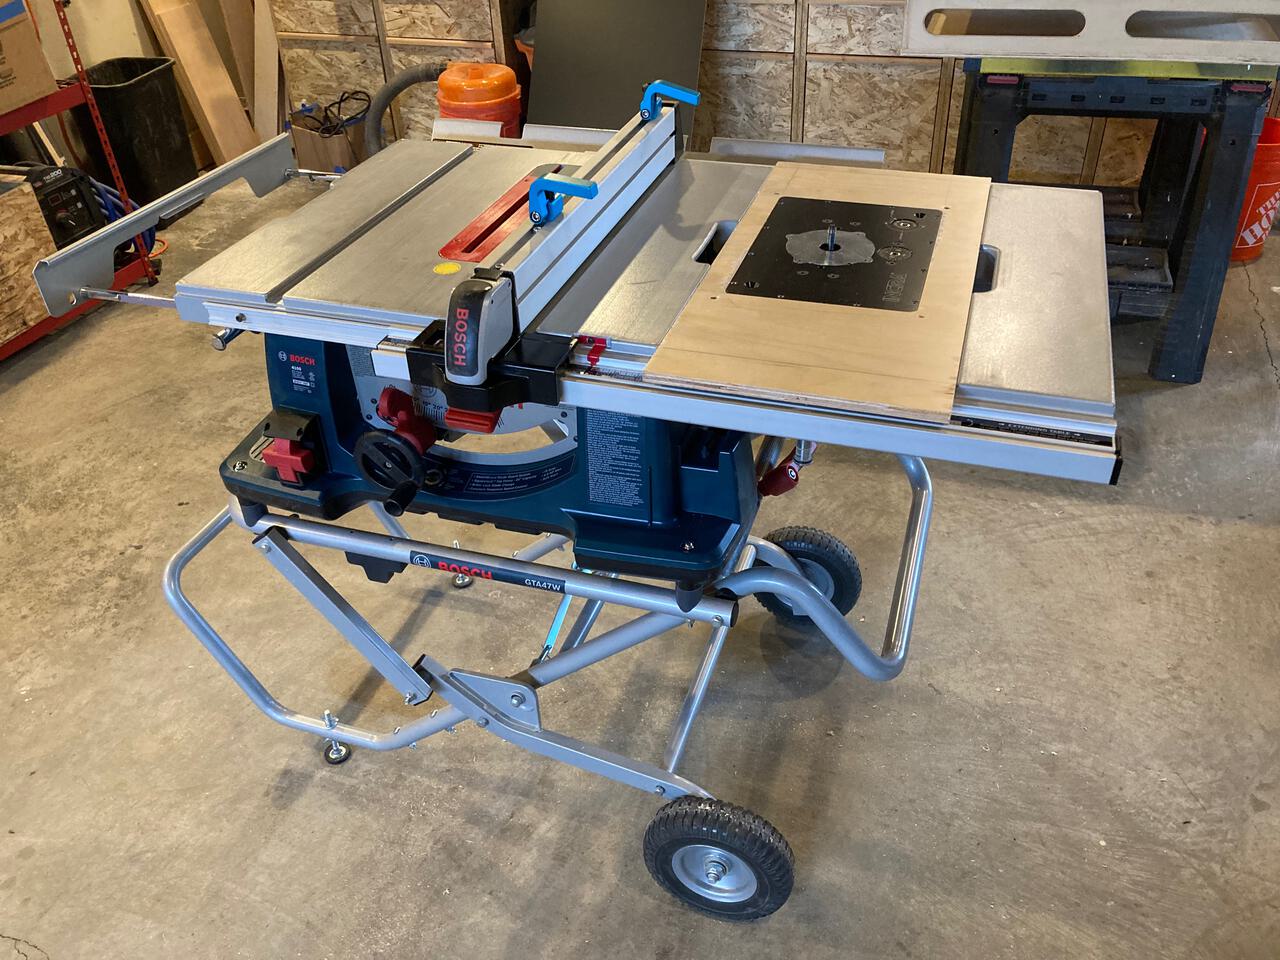 First version of this table saw is basic plywood